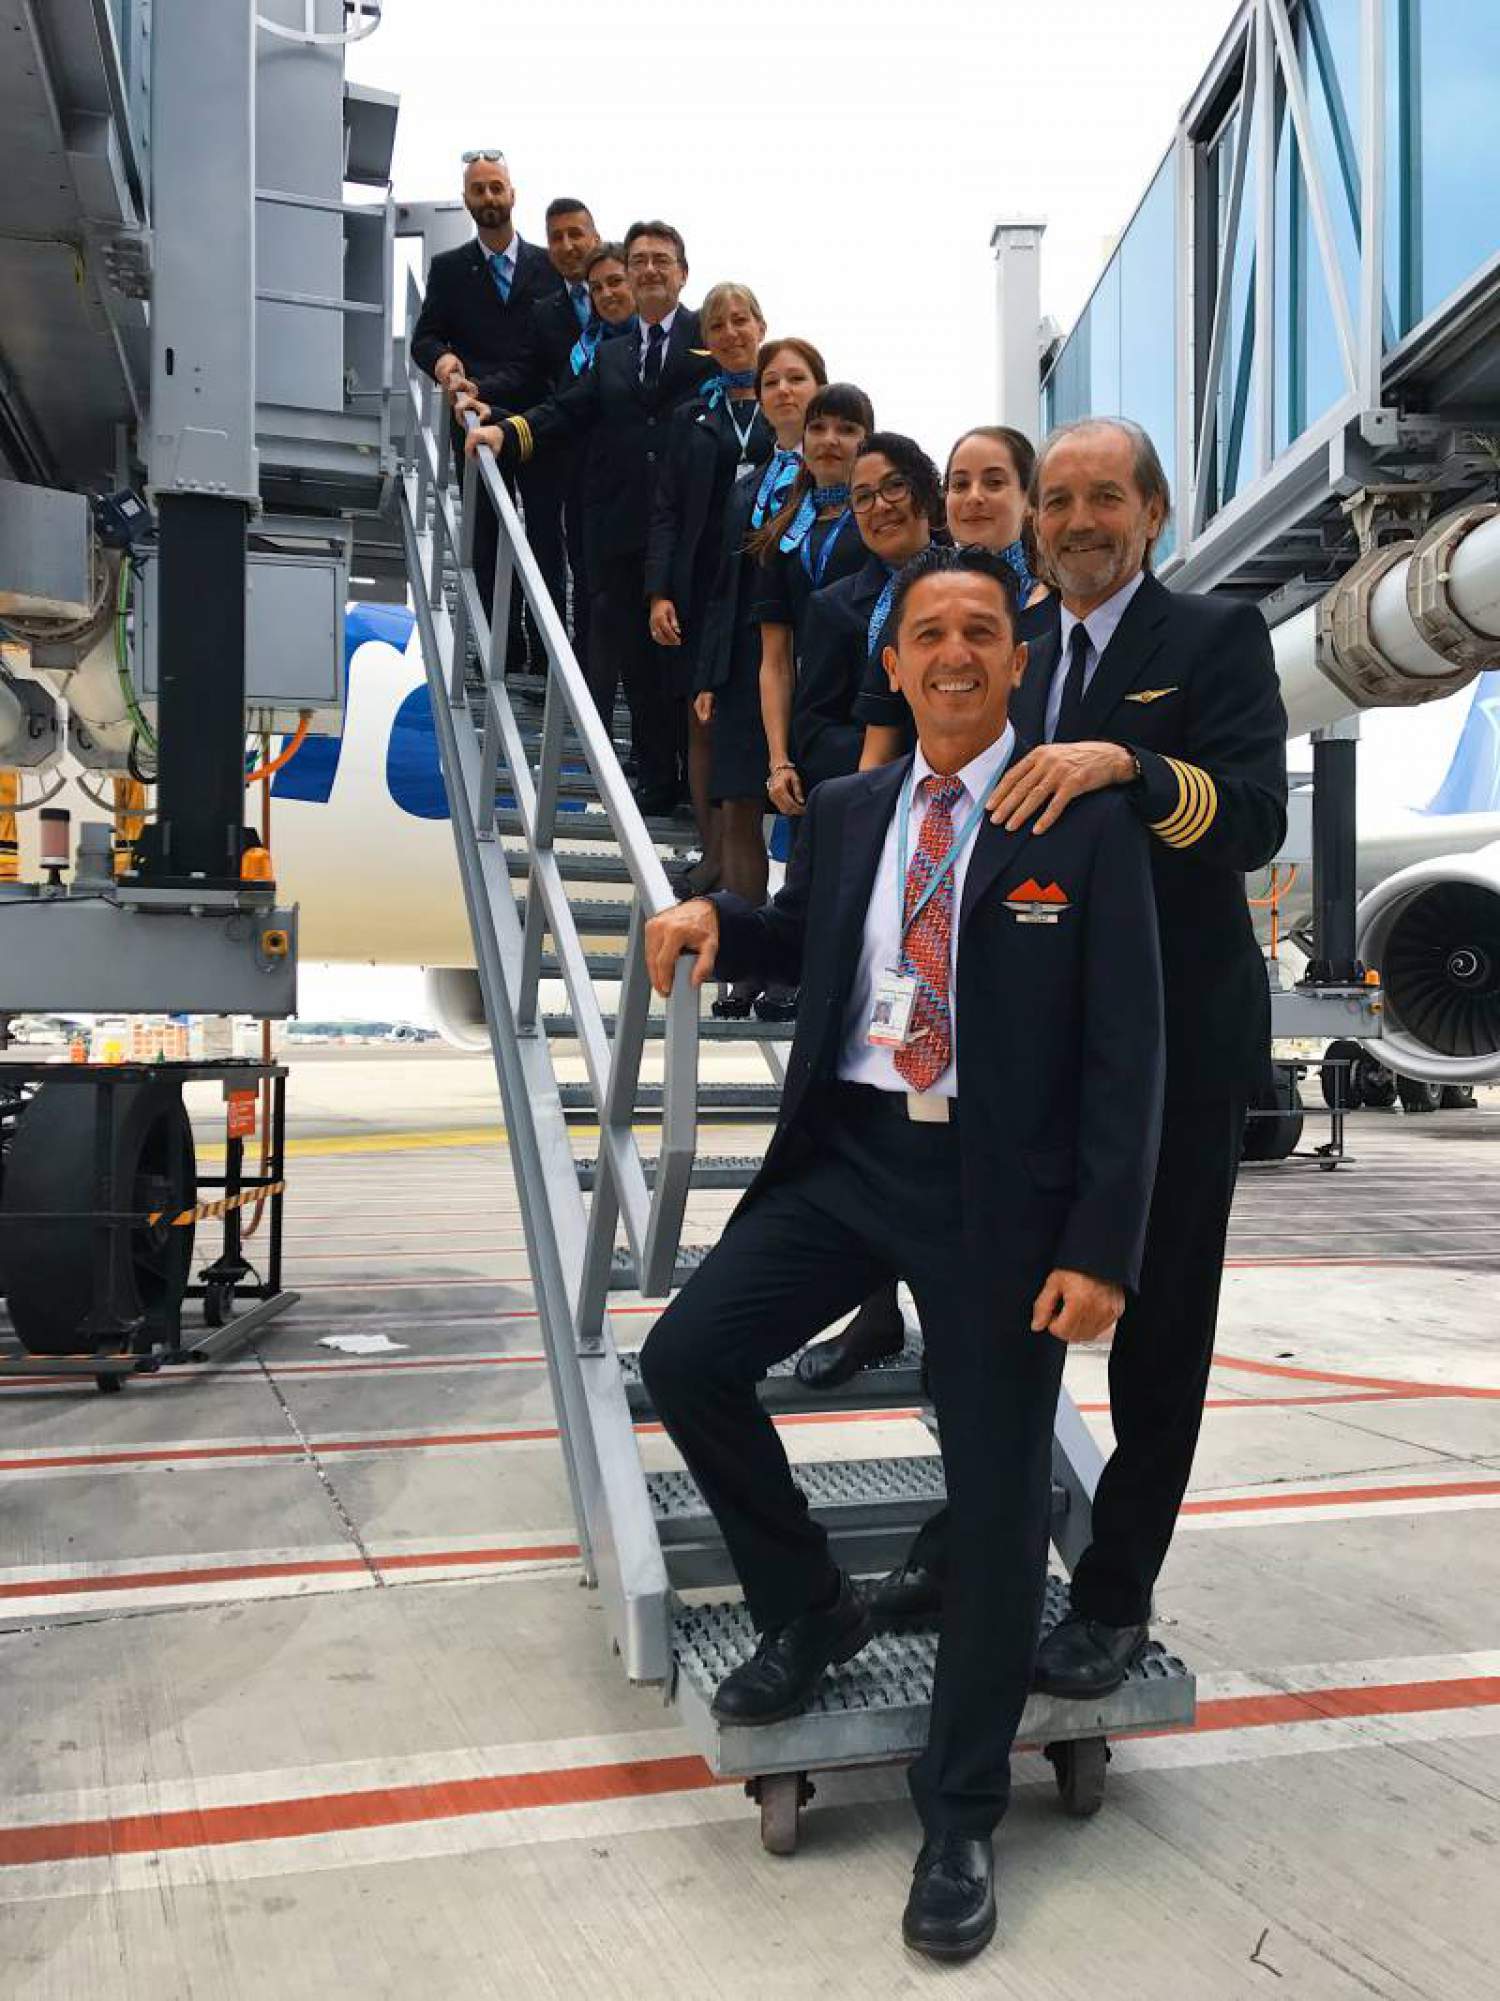 Captain Robert Piché and the crew operating his last flight as an Air Transat Captain